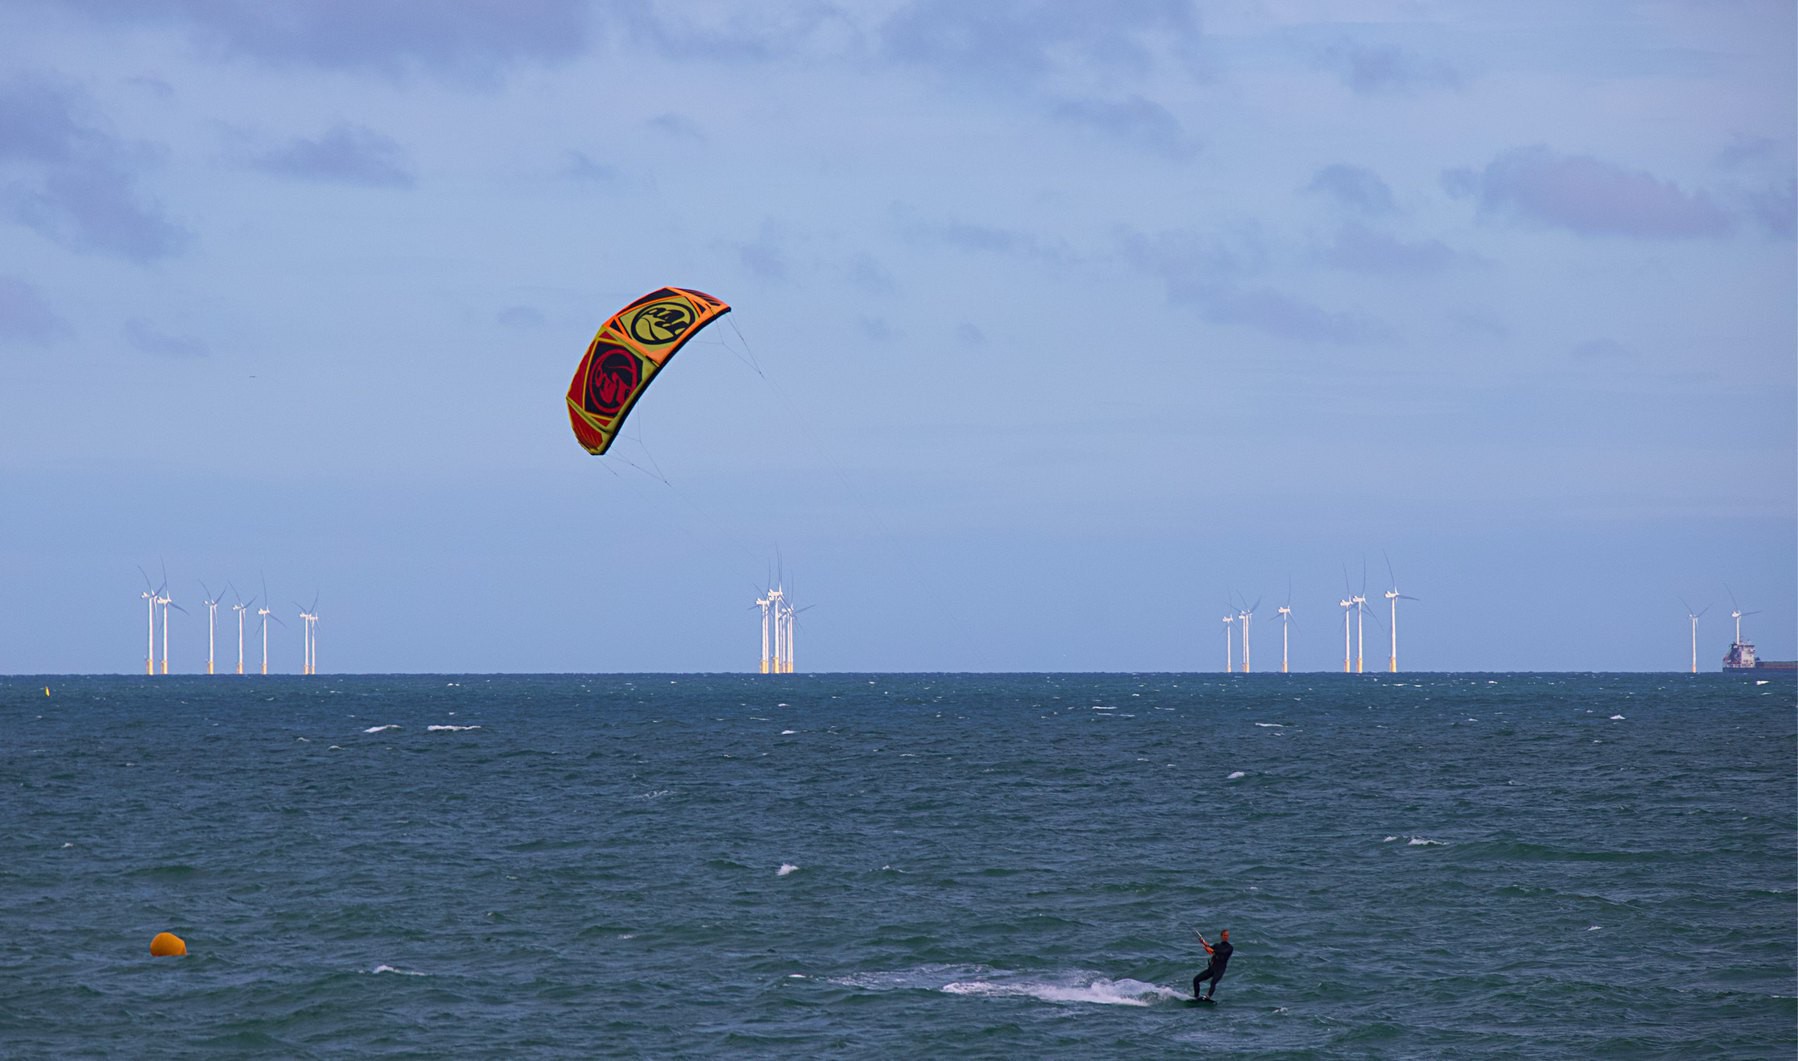 A kitesurfer surfing in front of the Rampion Wind Farm. 